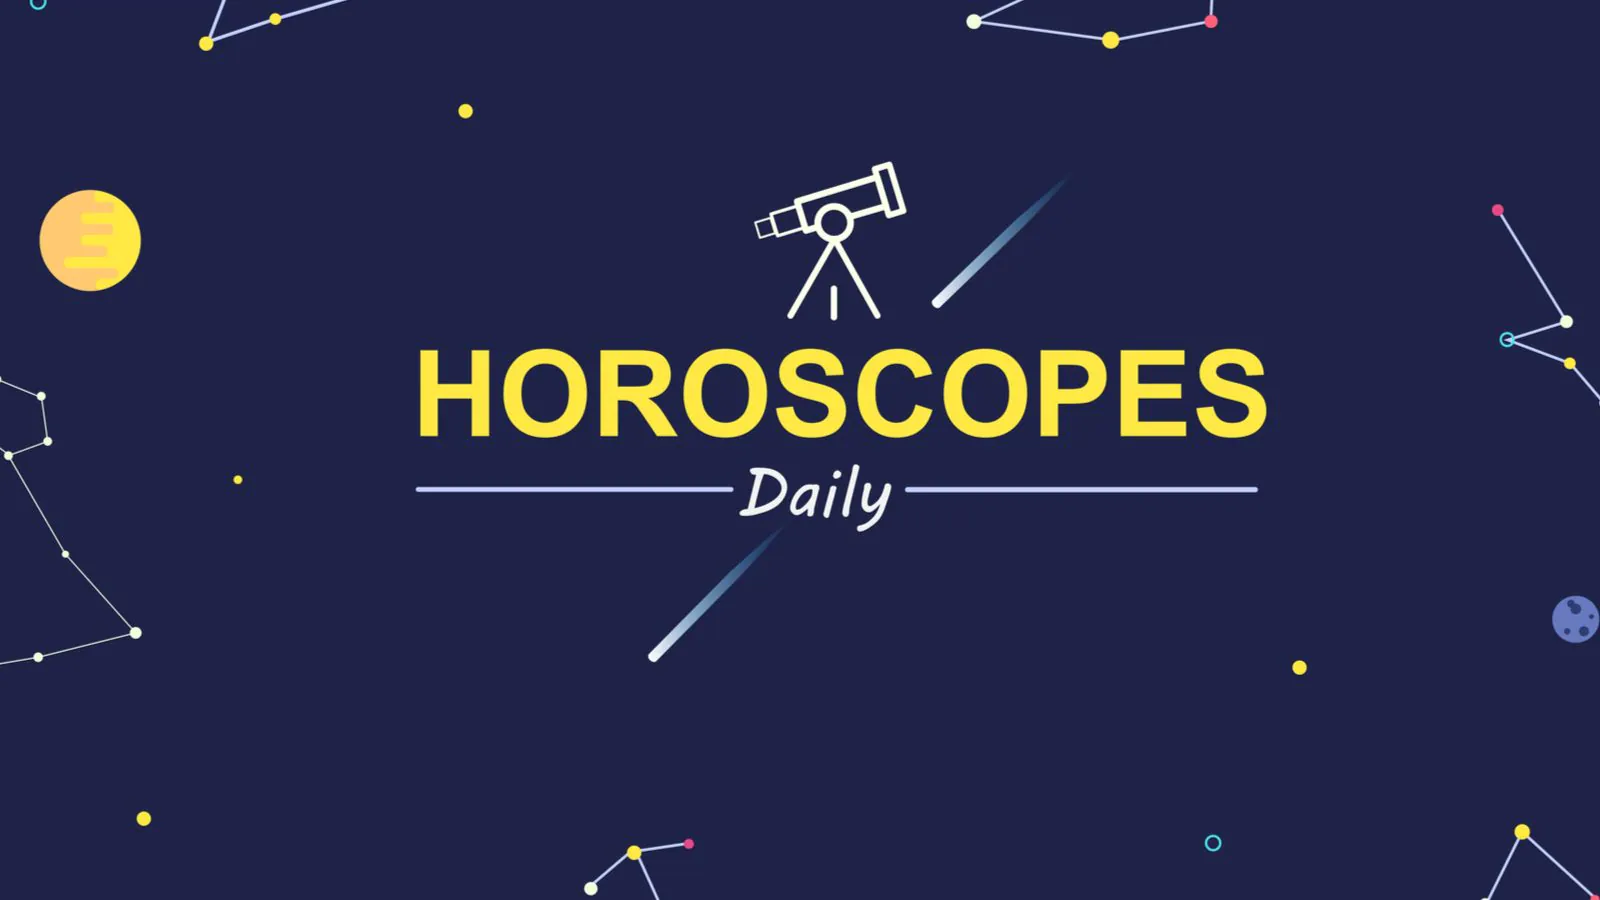 Check Out Daily Astrological Prediction for Aries, Taurus, Libra, Sagittarius, And Other Zodiac Signs for Wednesday